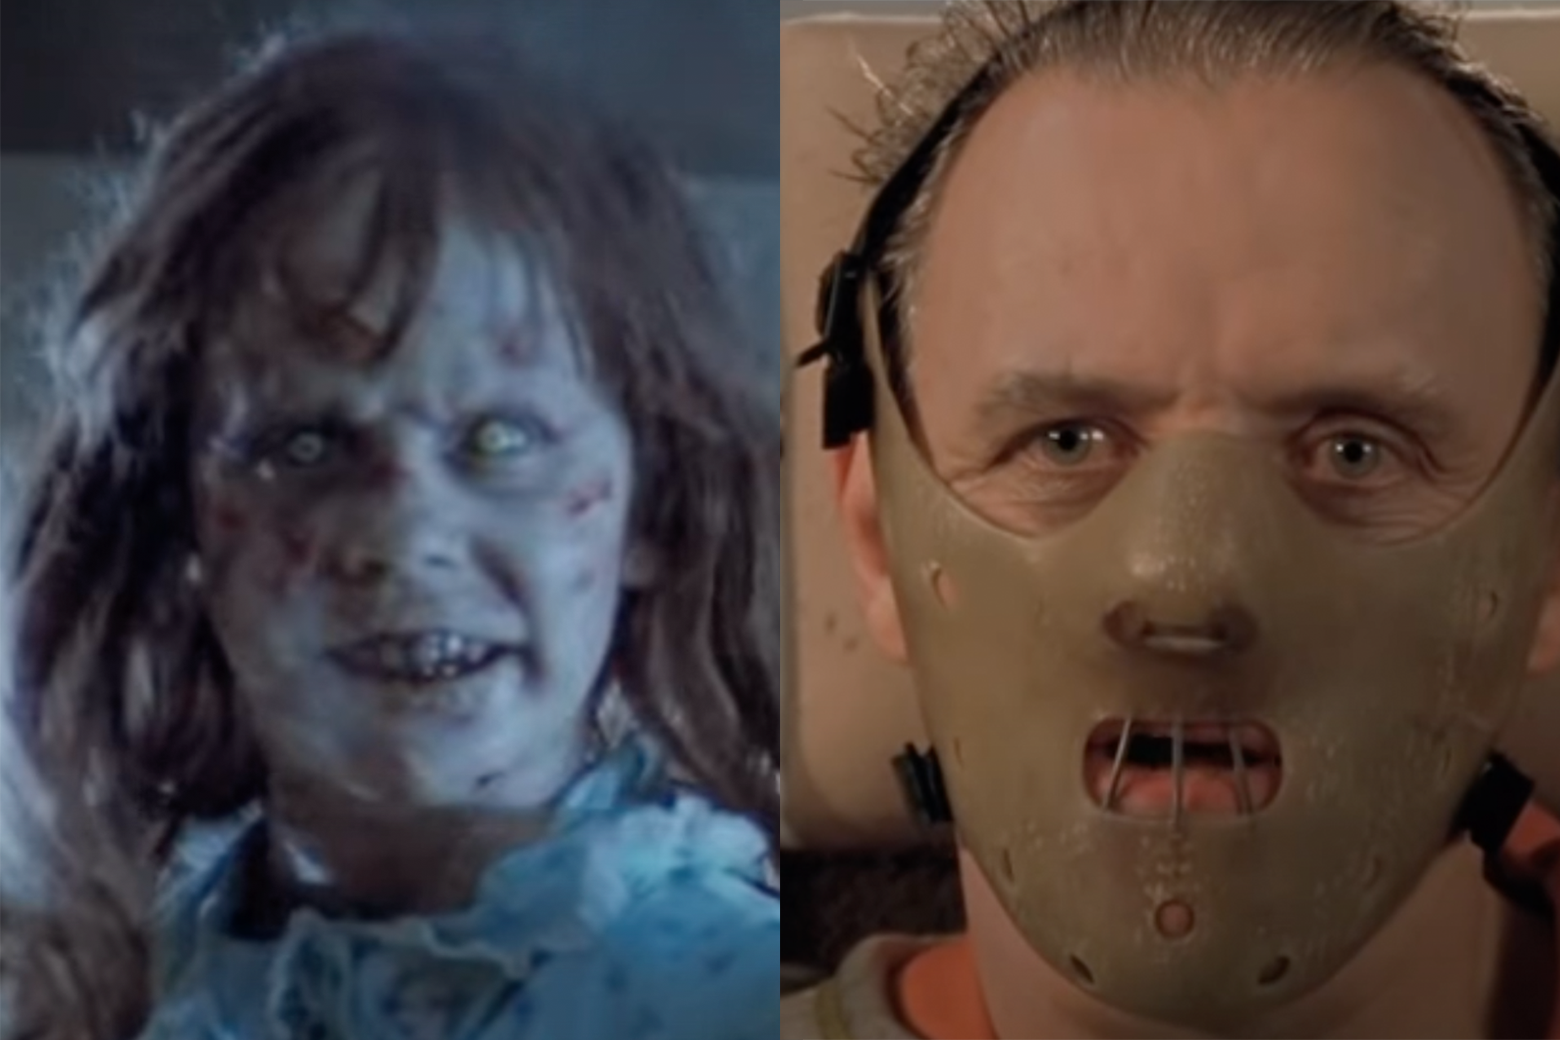 The Exorcist: 10 creepy details from the scariest movie ever made